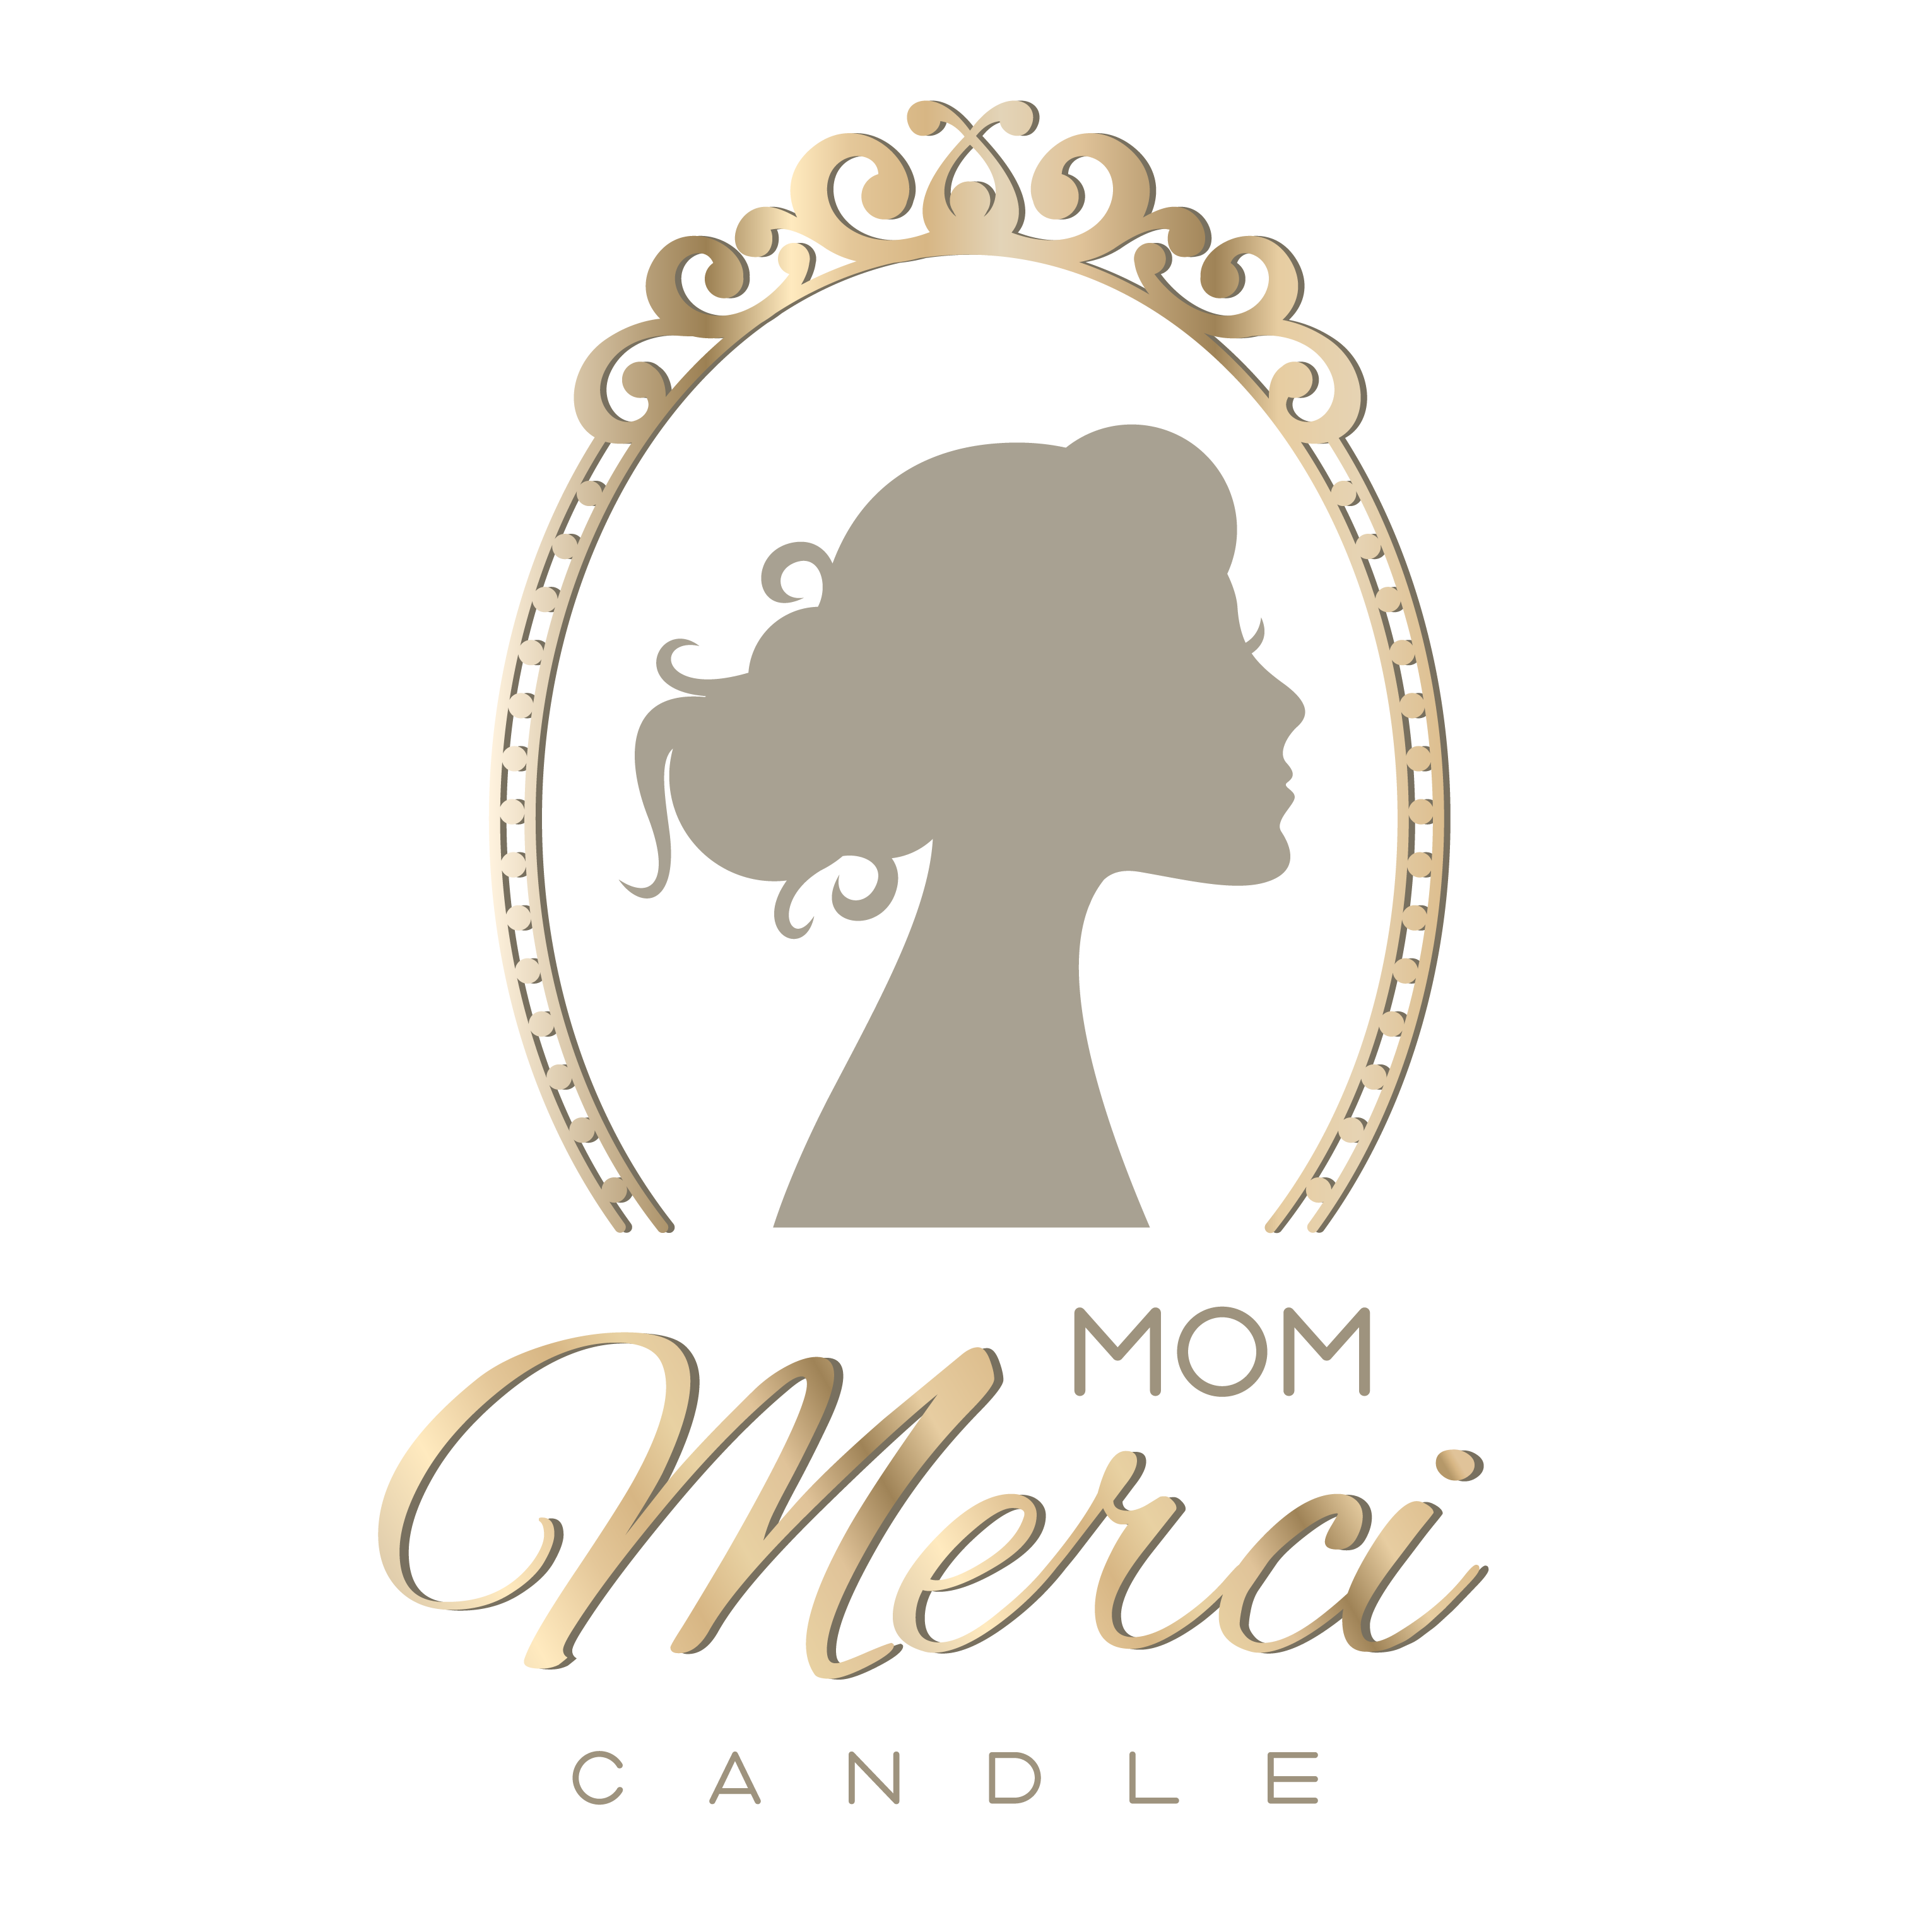 La Fréquence ~ Mother of Mercy” Candle